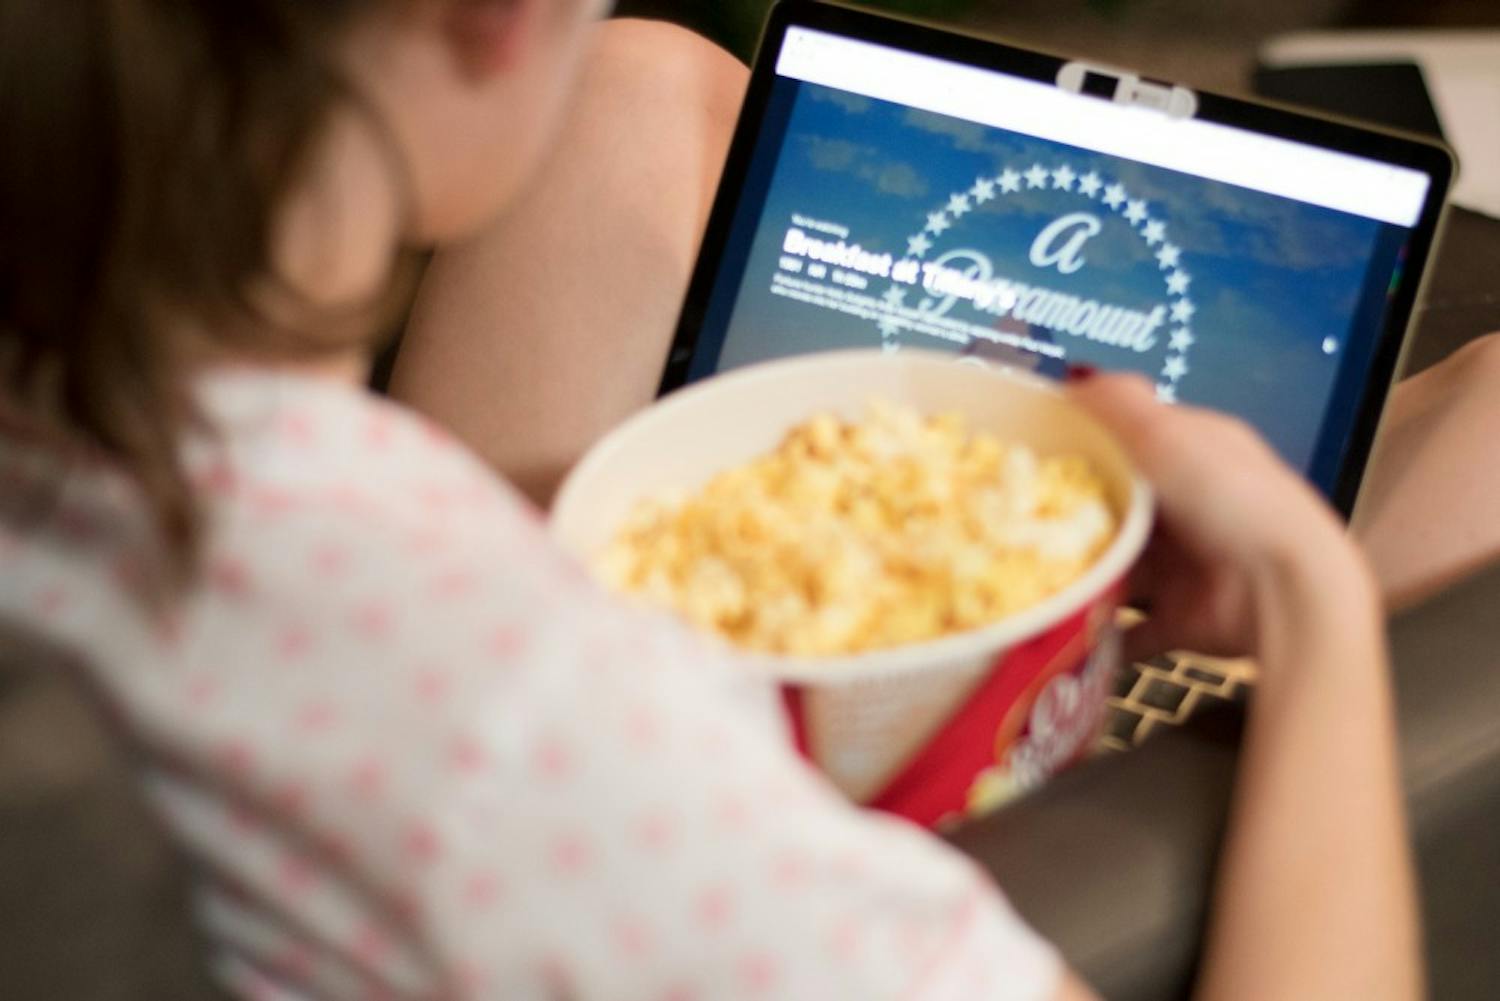 A student watches a movie on Netflix with a bowl of popcorn on Monday, Feb. 5, 2018, in Auburn, Ala.